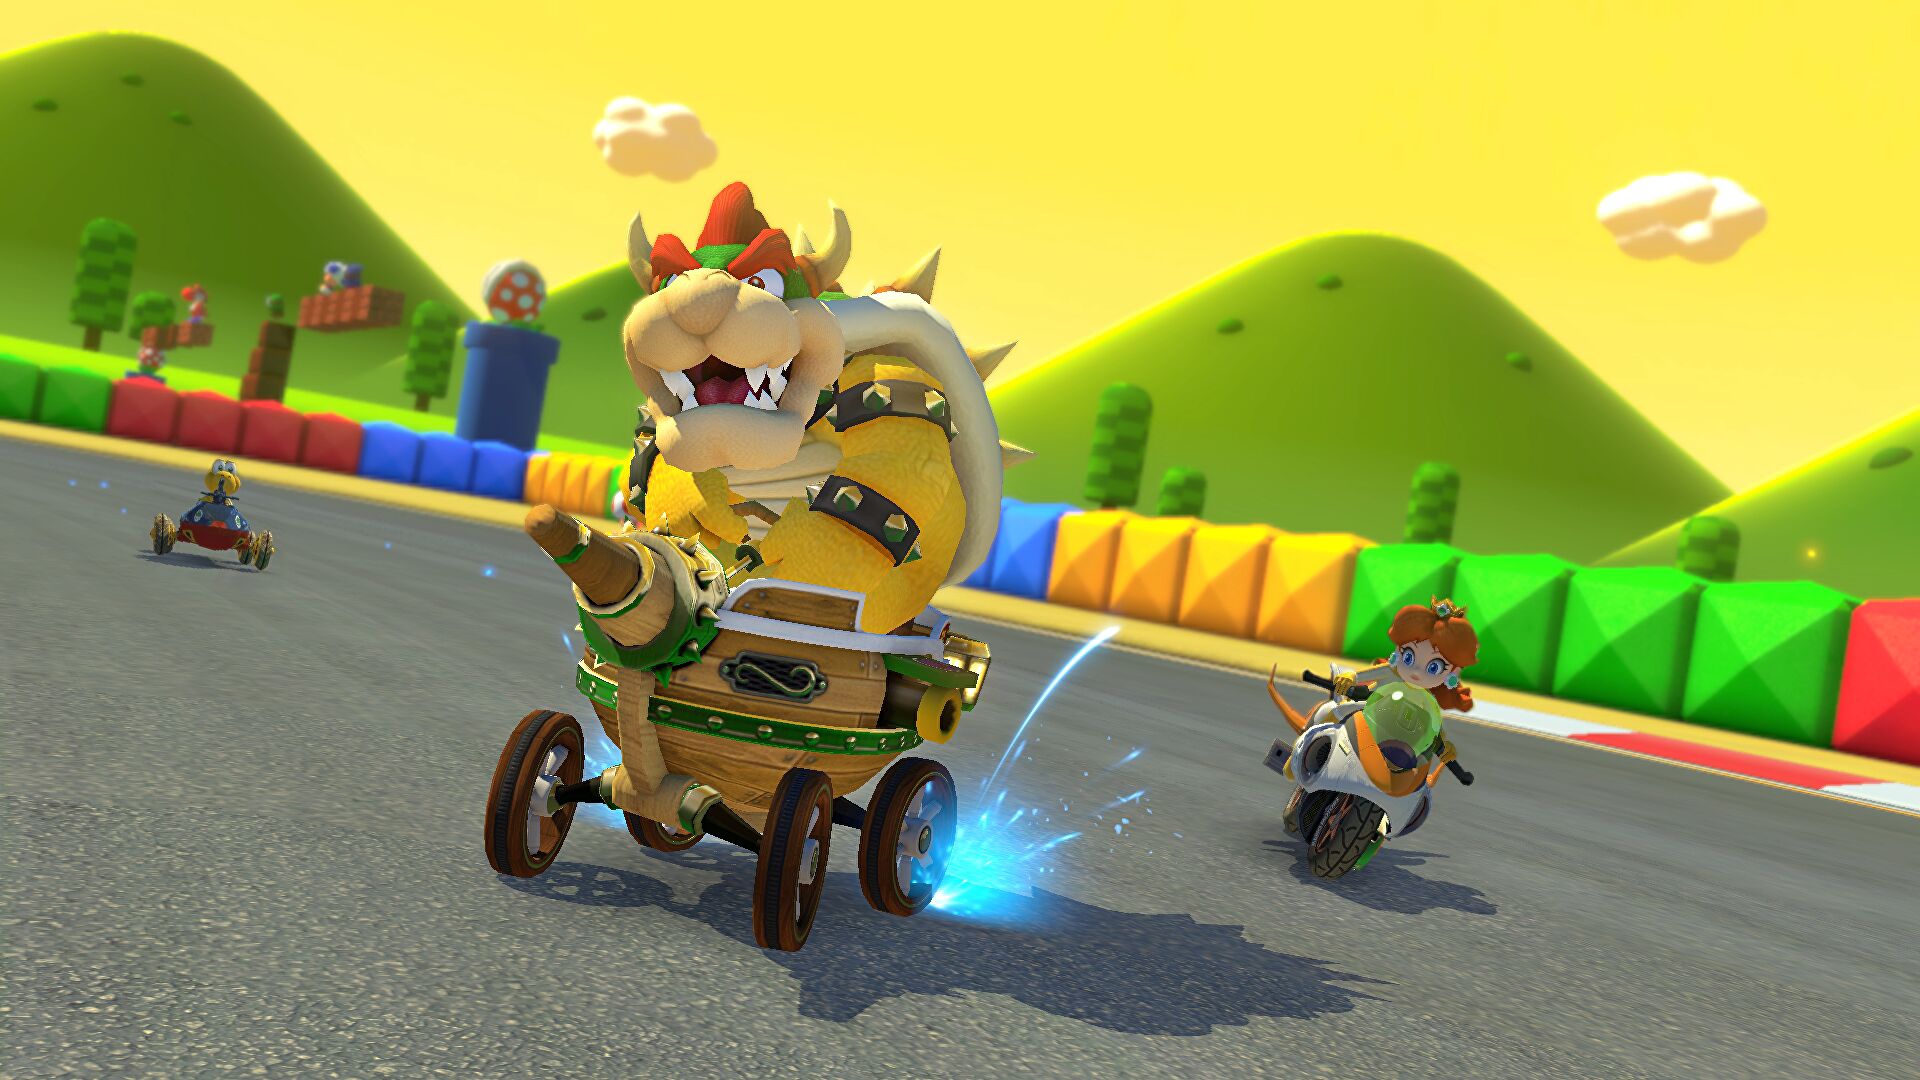 mario kart 8 deluxe booster pack dlc wave 2 (1)  Image of mario kart 8 deluxe booster pack dlc wave 2 (1)